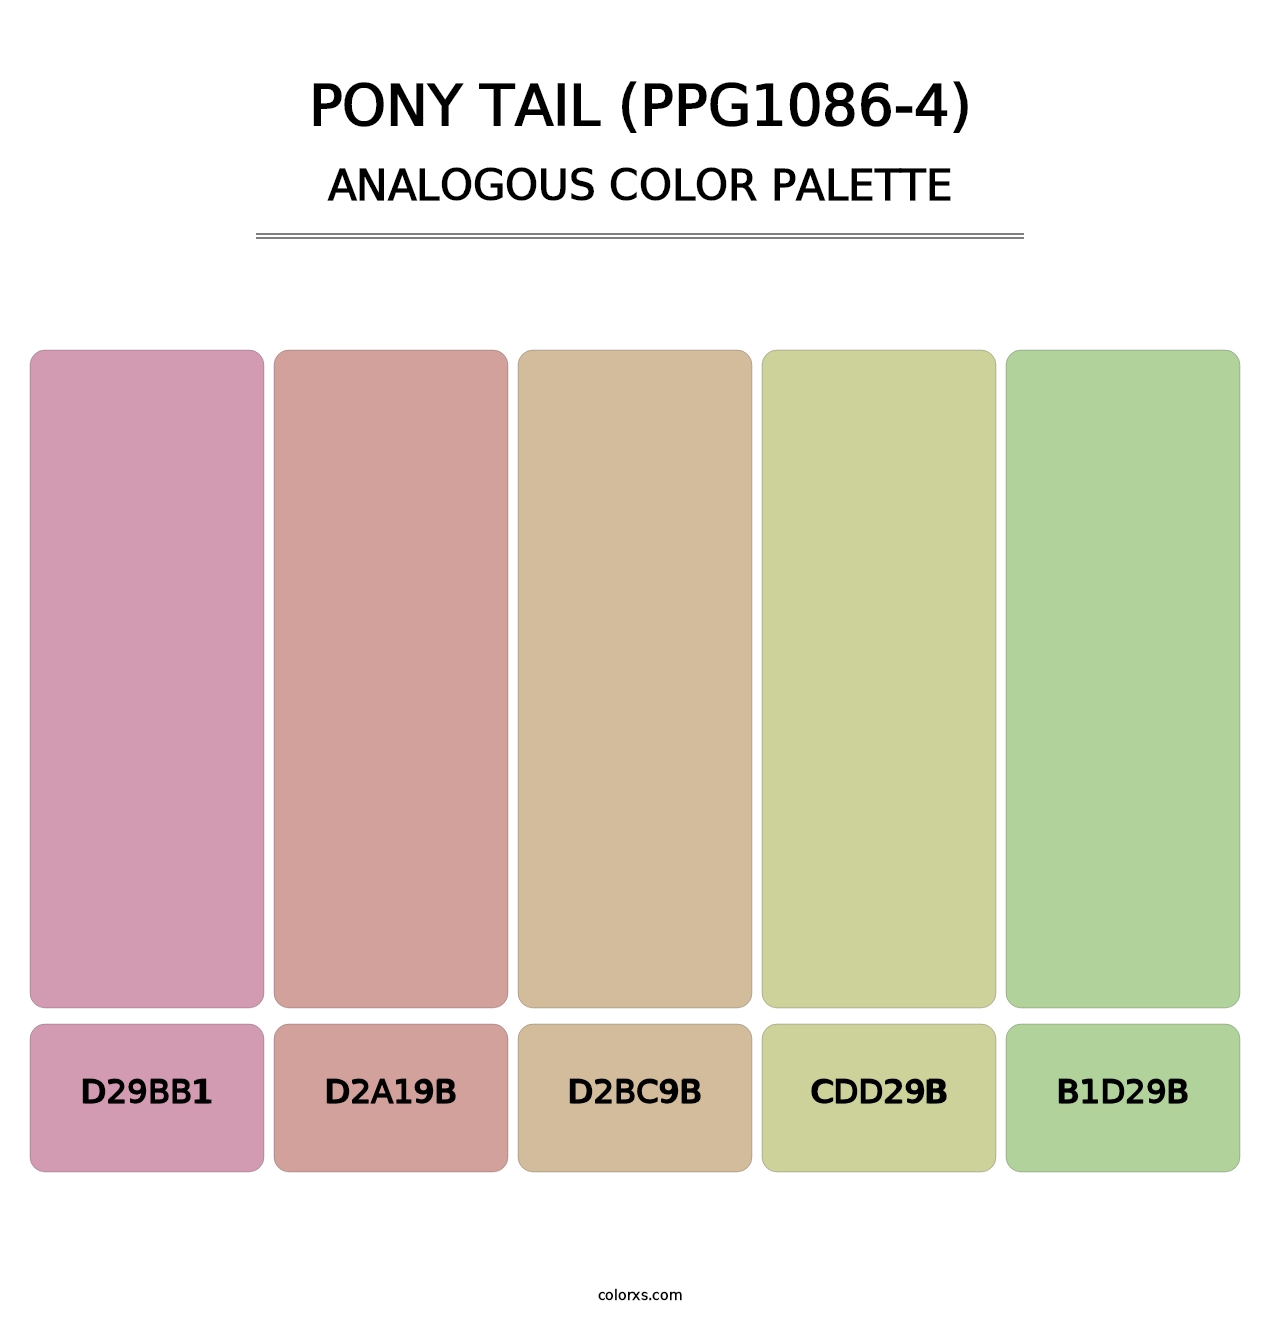 Pony Tail (PPG1086-4) - Analogous Color Palette